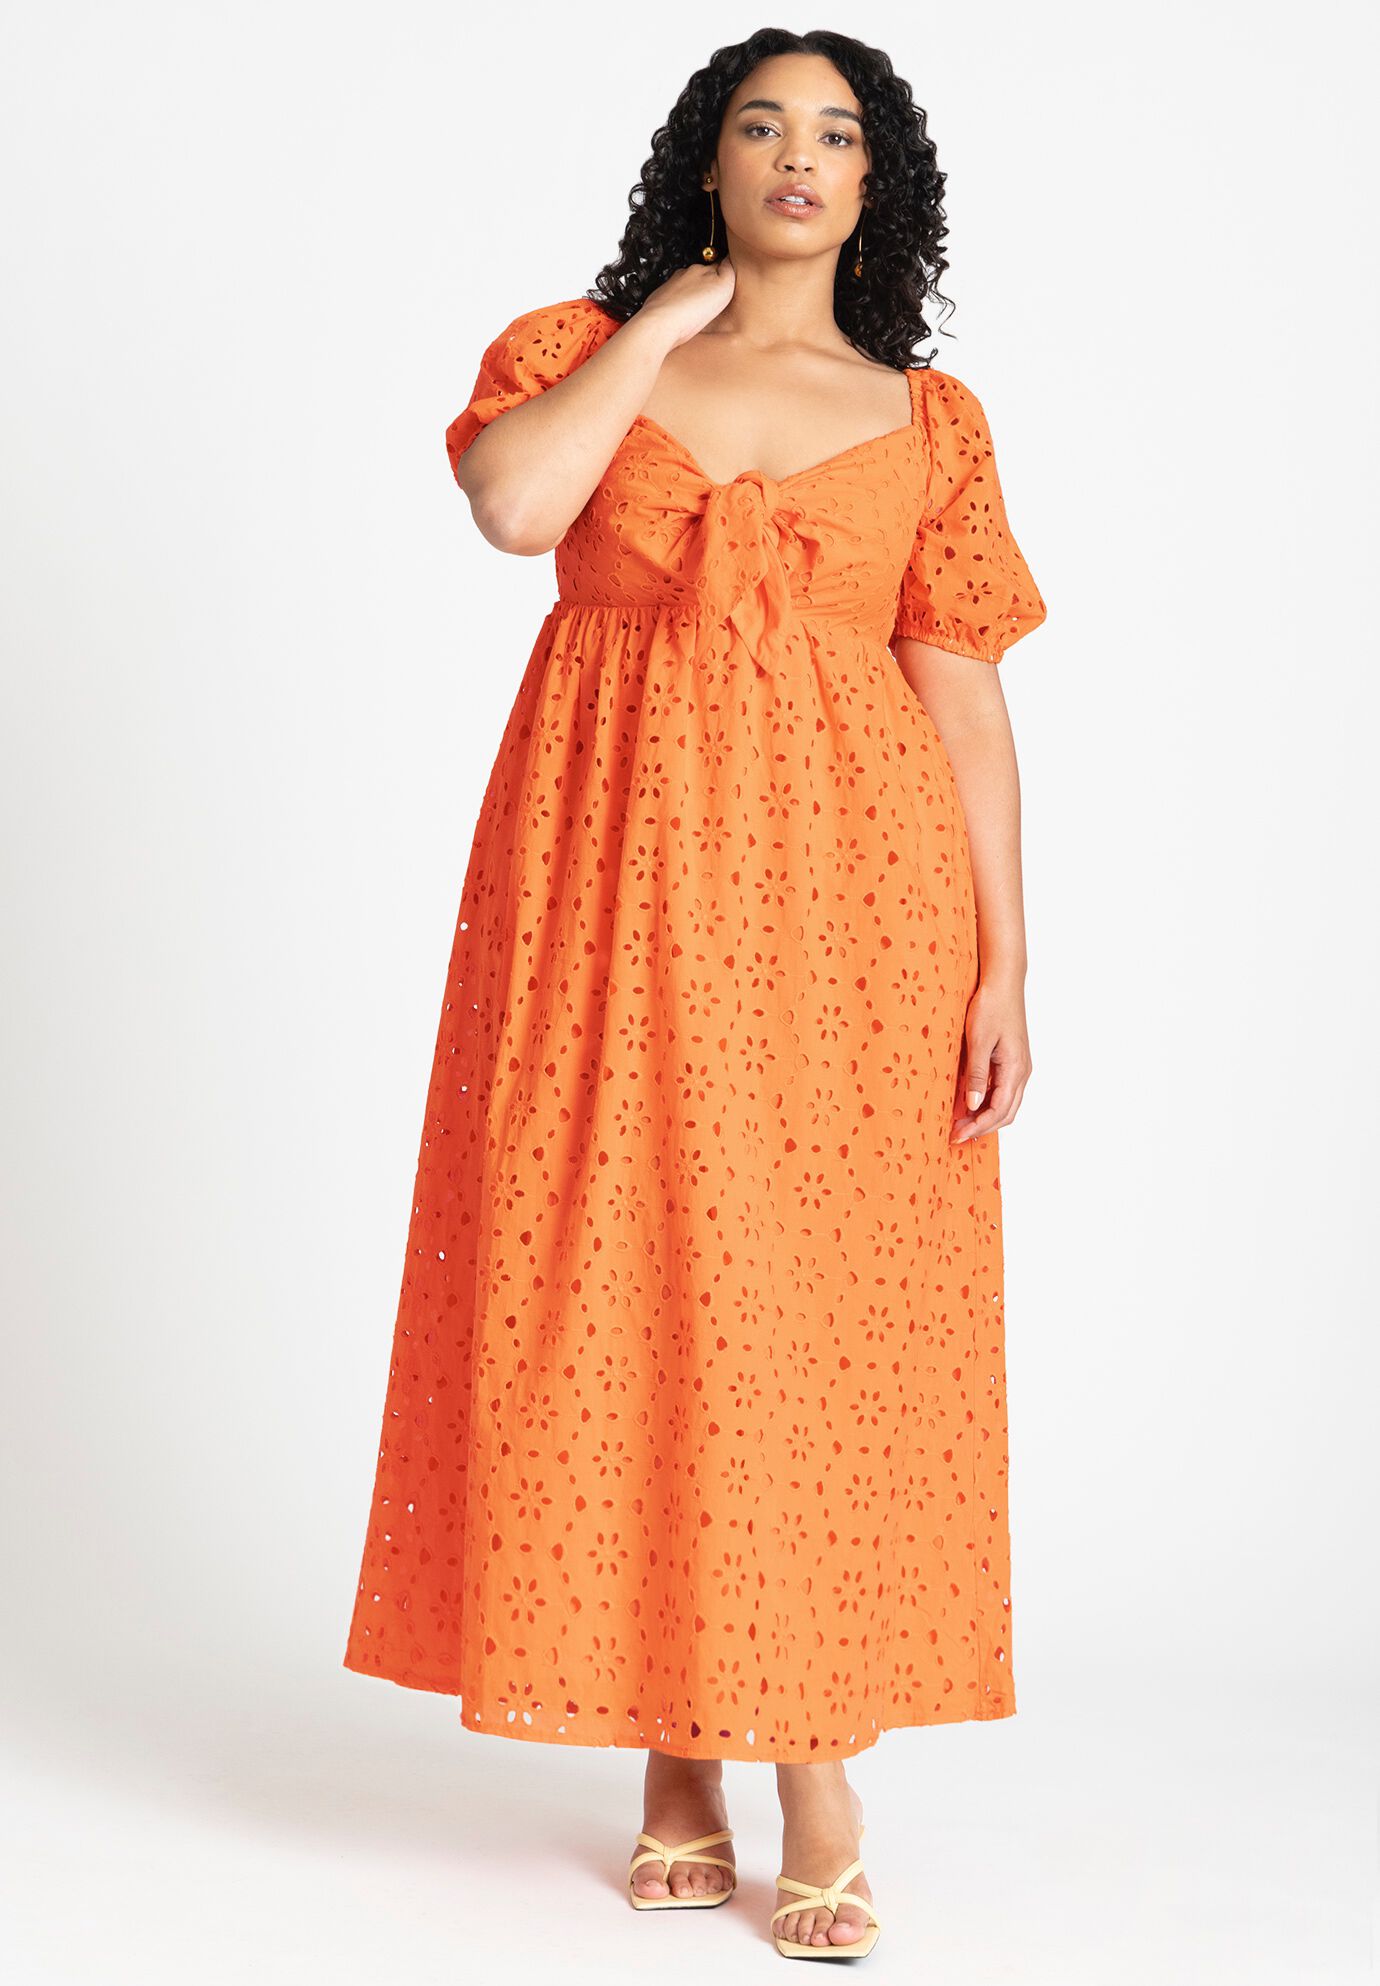 Floral Print Cotton Full-Skirt Sweetheart Dress by Eloquii